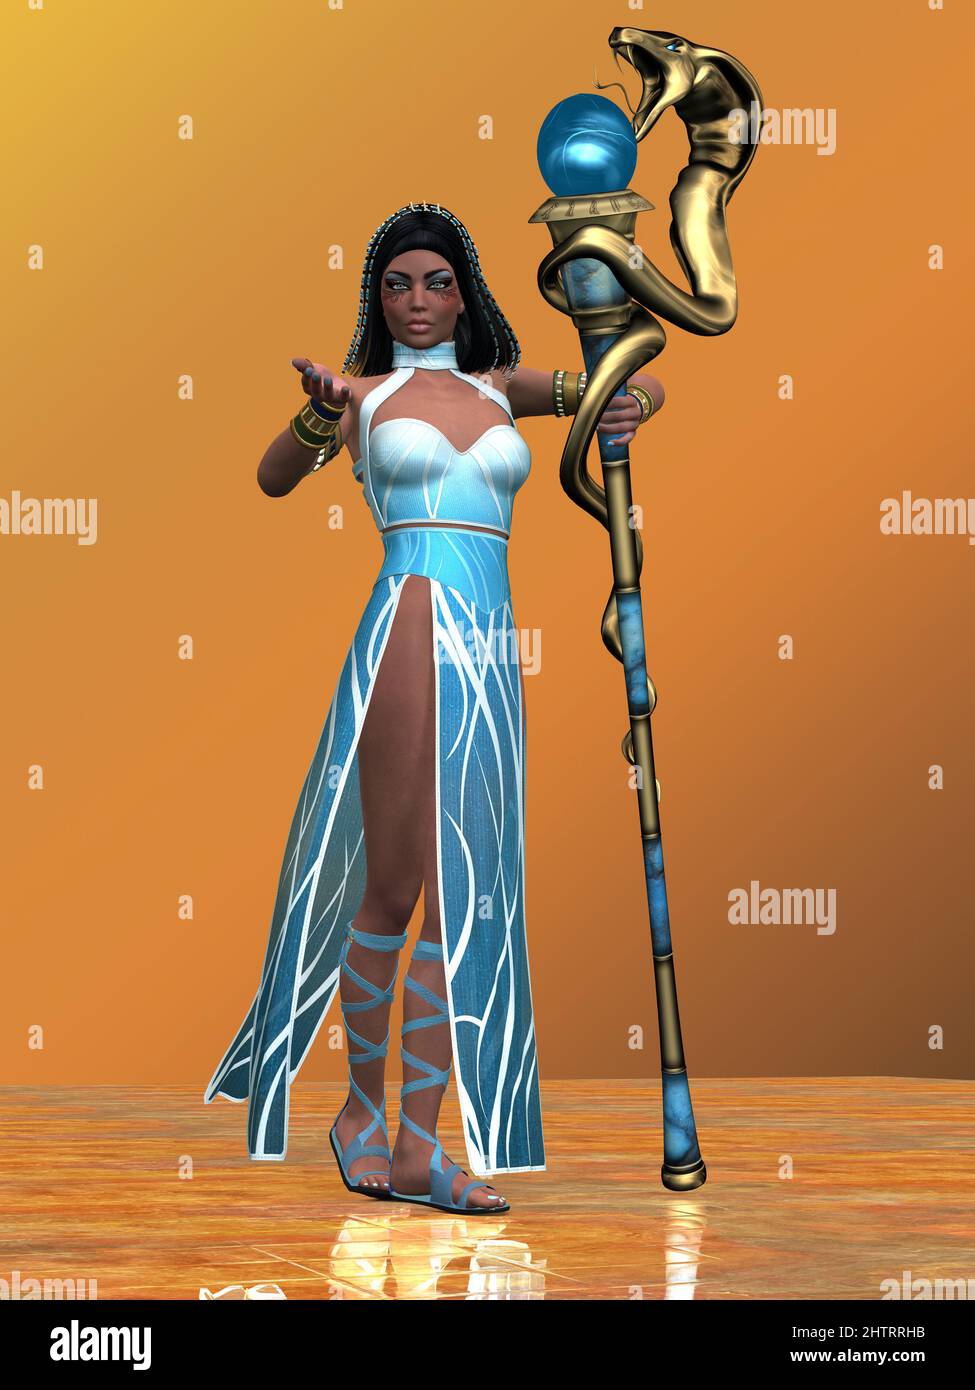 An Egyptian queen in a blue gown stands with a snake staff representing the Blue Nile river. Stock Photo